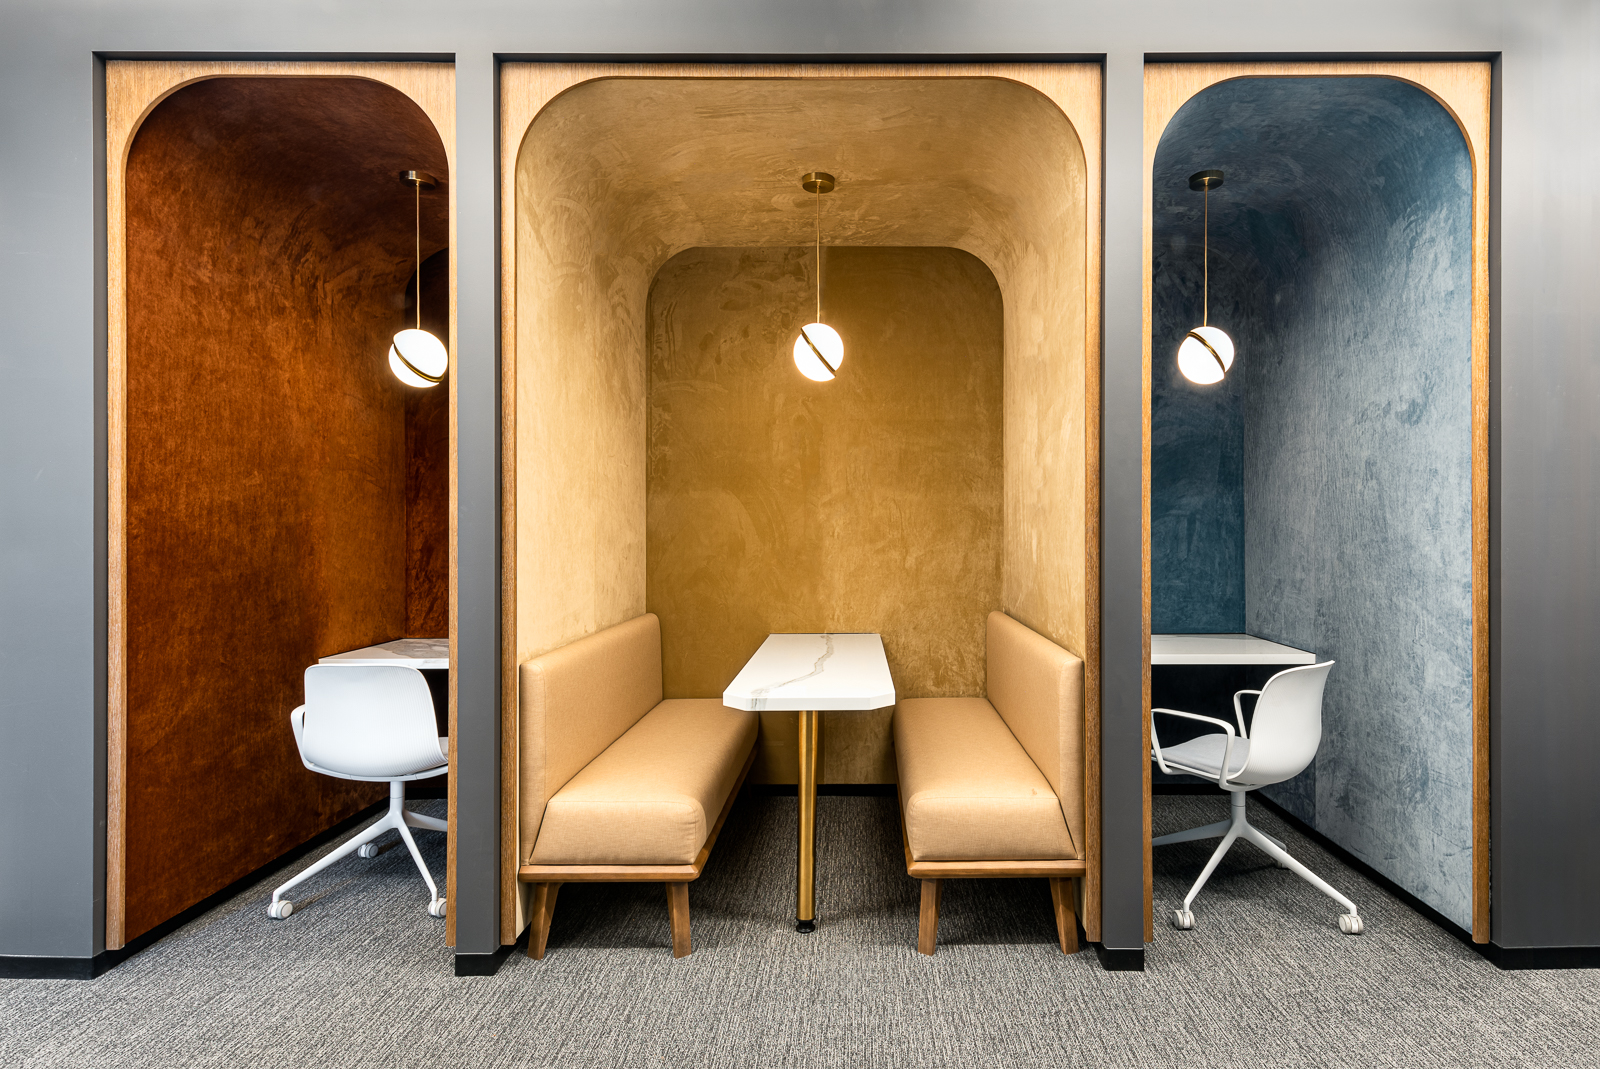 Three multicolored work cubbies with decorative lighting and velvet walls